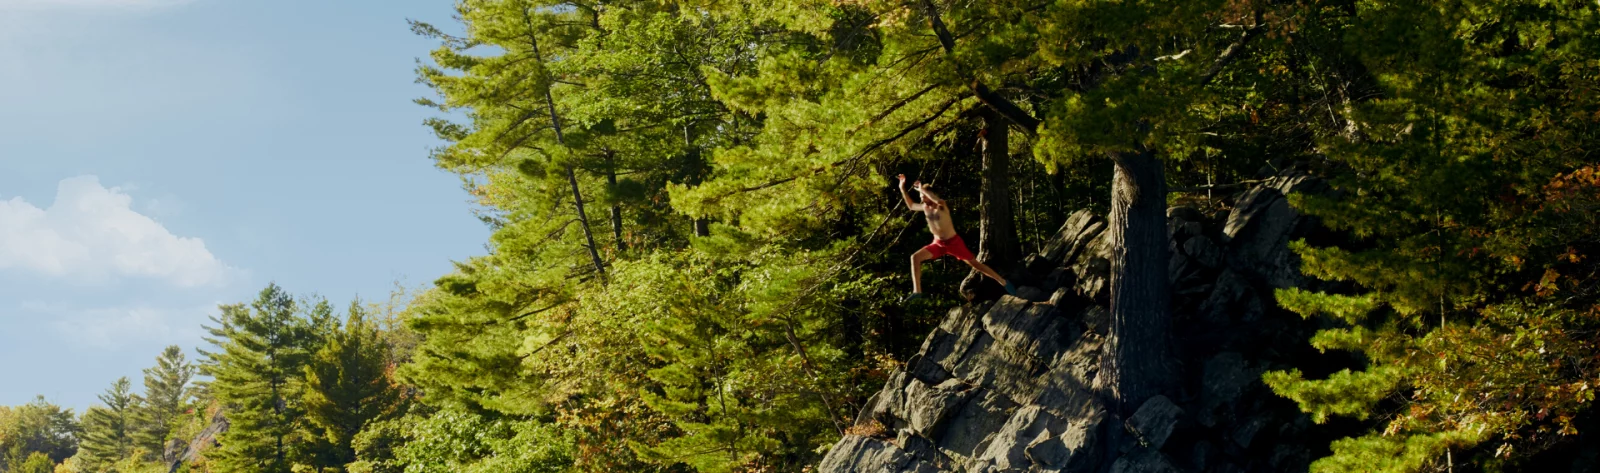 A man leaps into a clear lake from an overhanging cliff